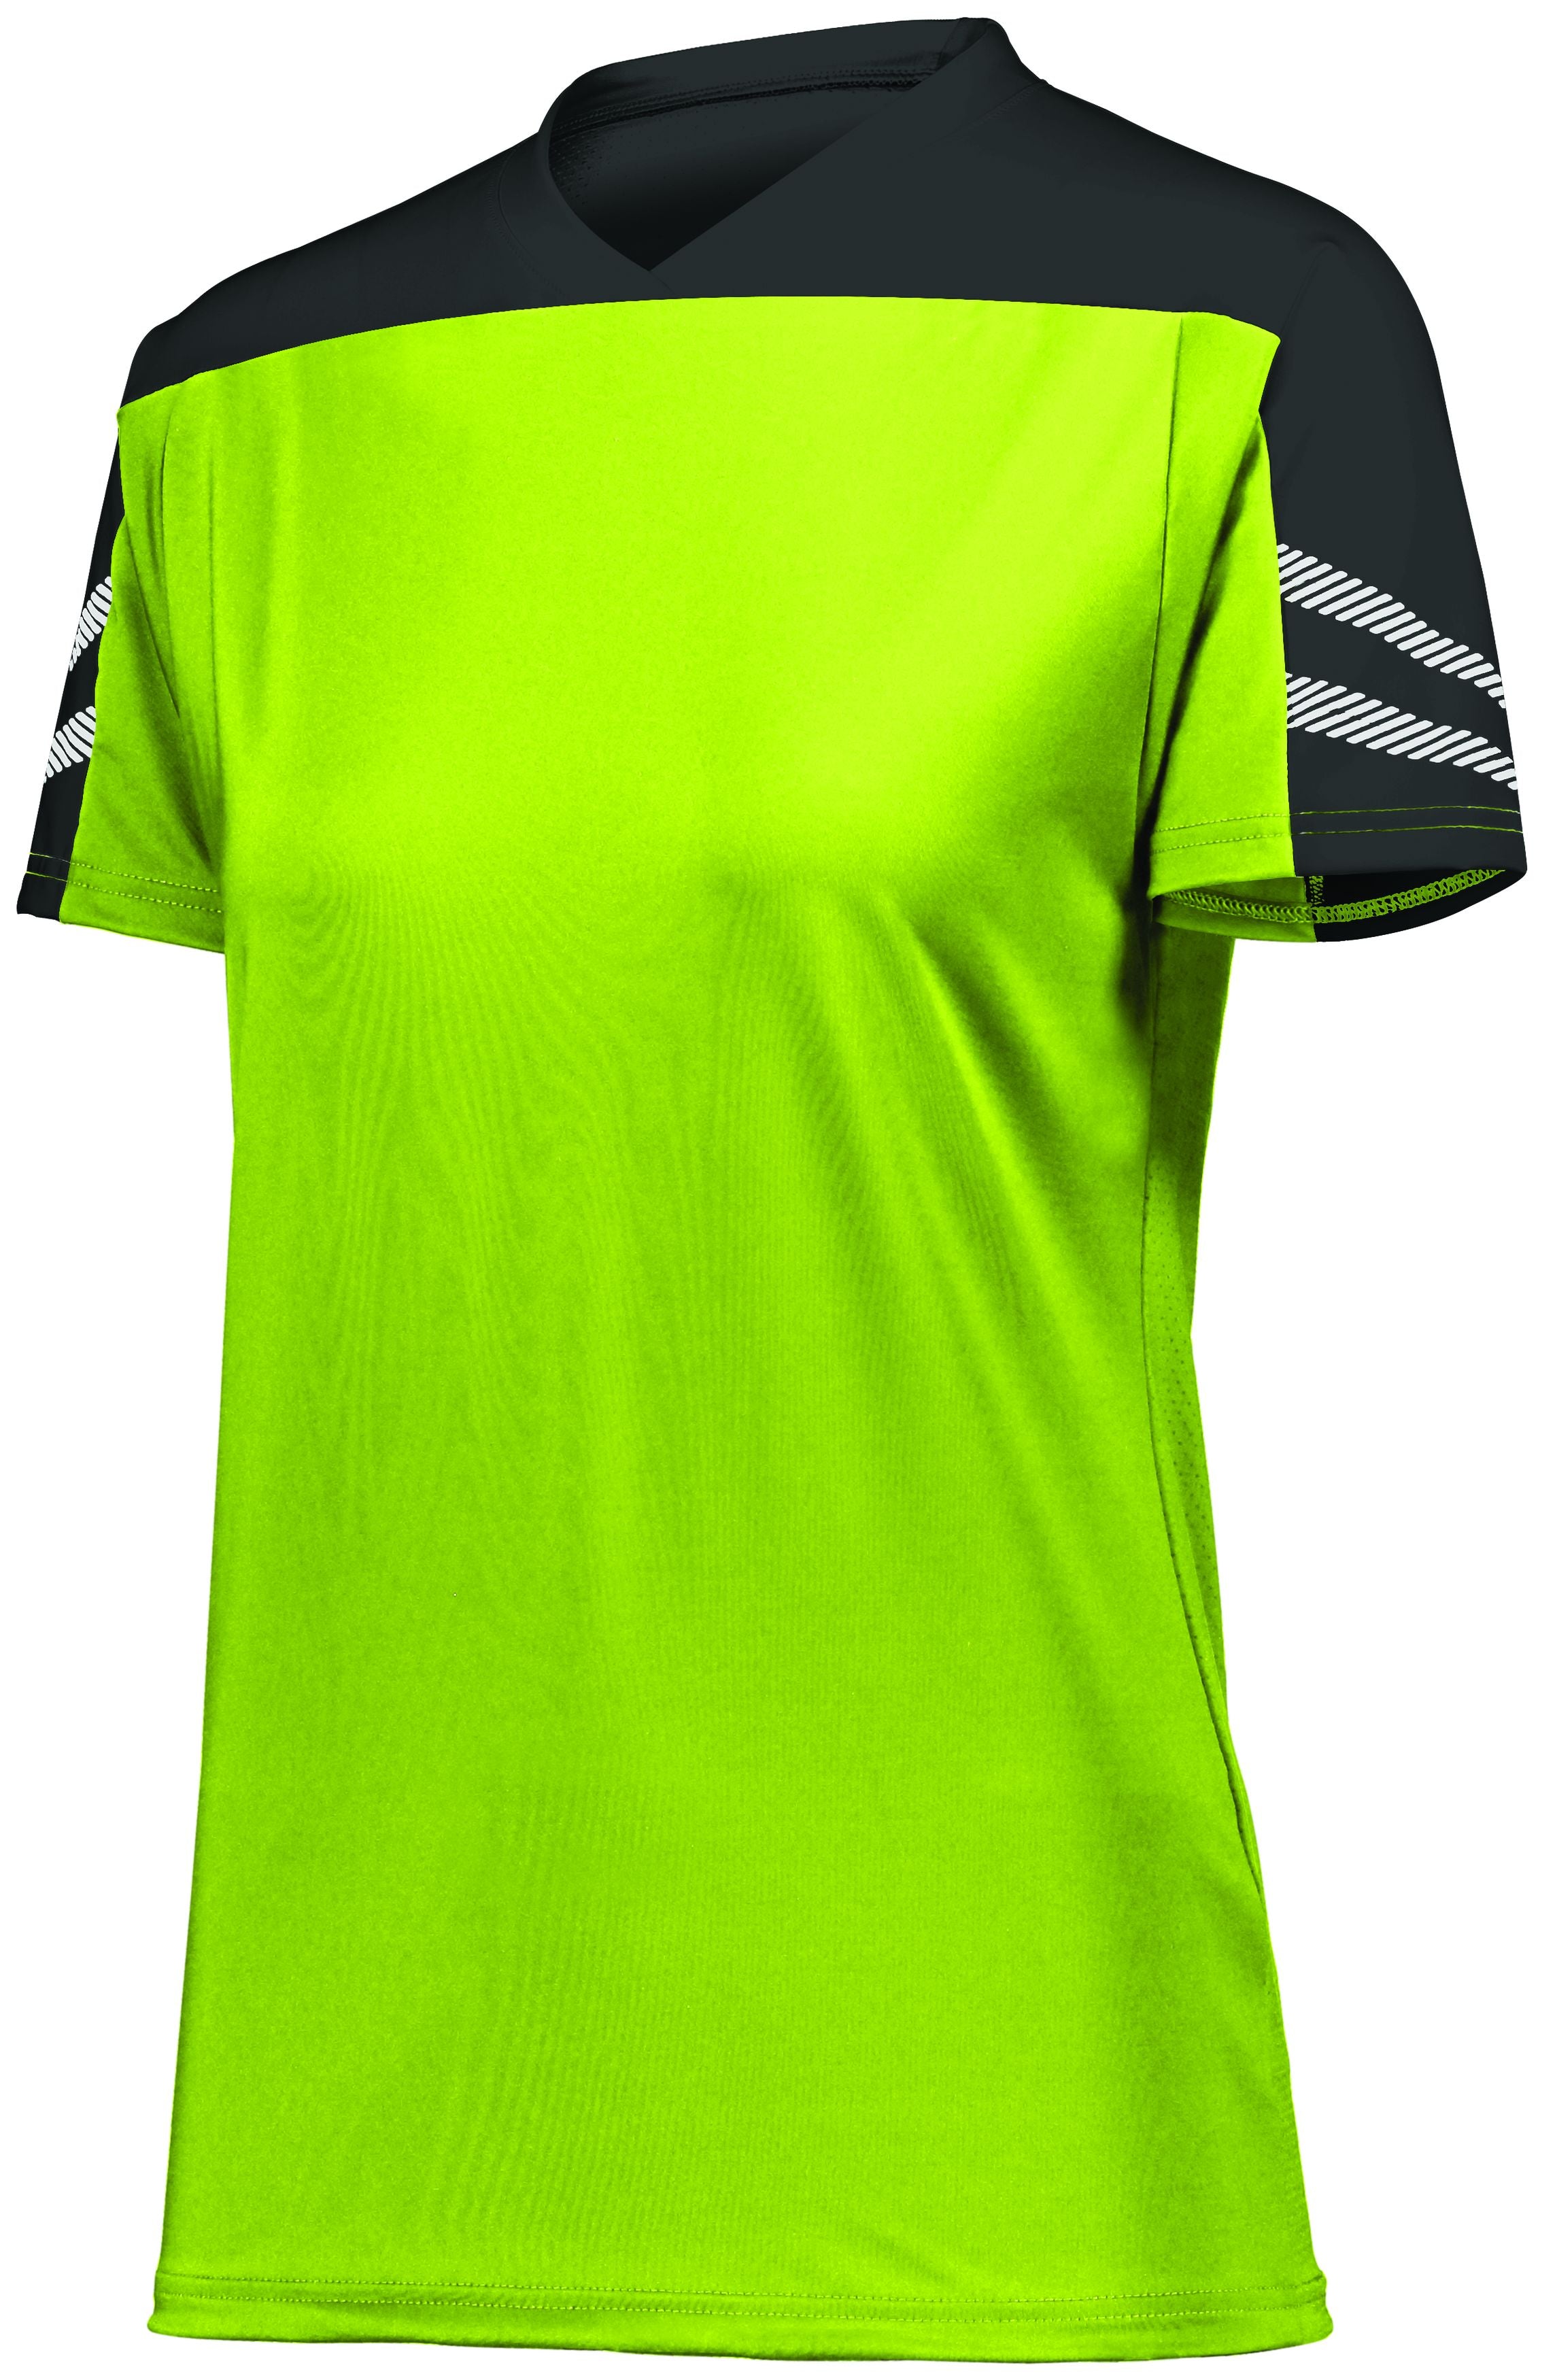 High 5 Ladies Anfield Soccer Jersey in Lime/Black/White  -Part of the Ladies, Ladies-Jersey, High5-Products, Soccer, Shirts, All-Sports-1 product lines at KanaleyCreations.com